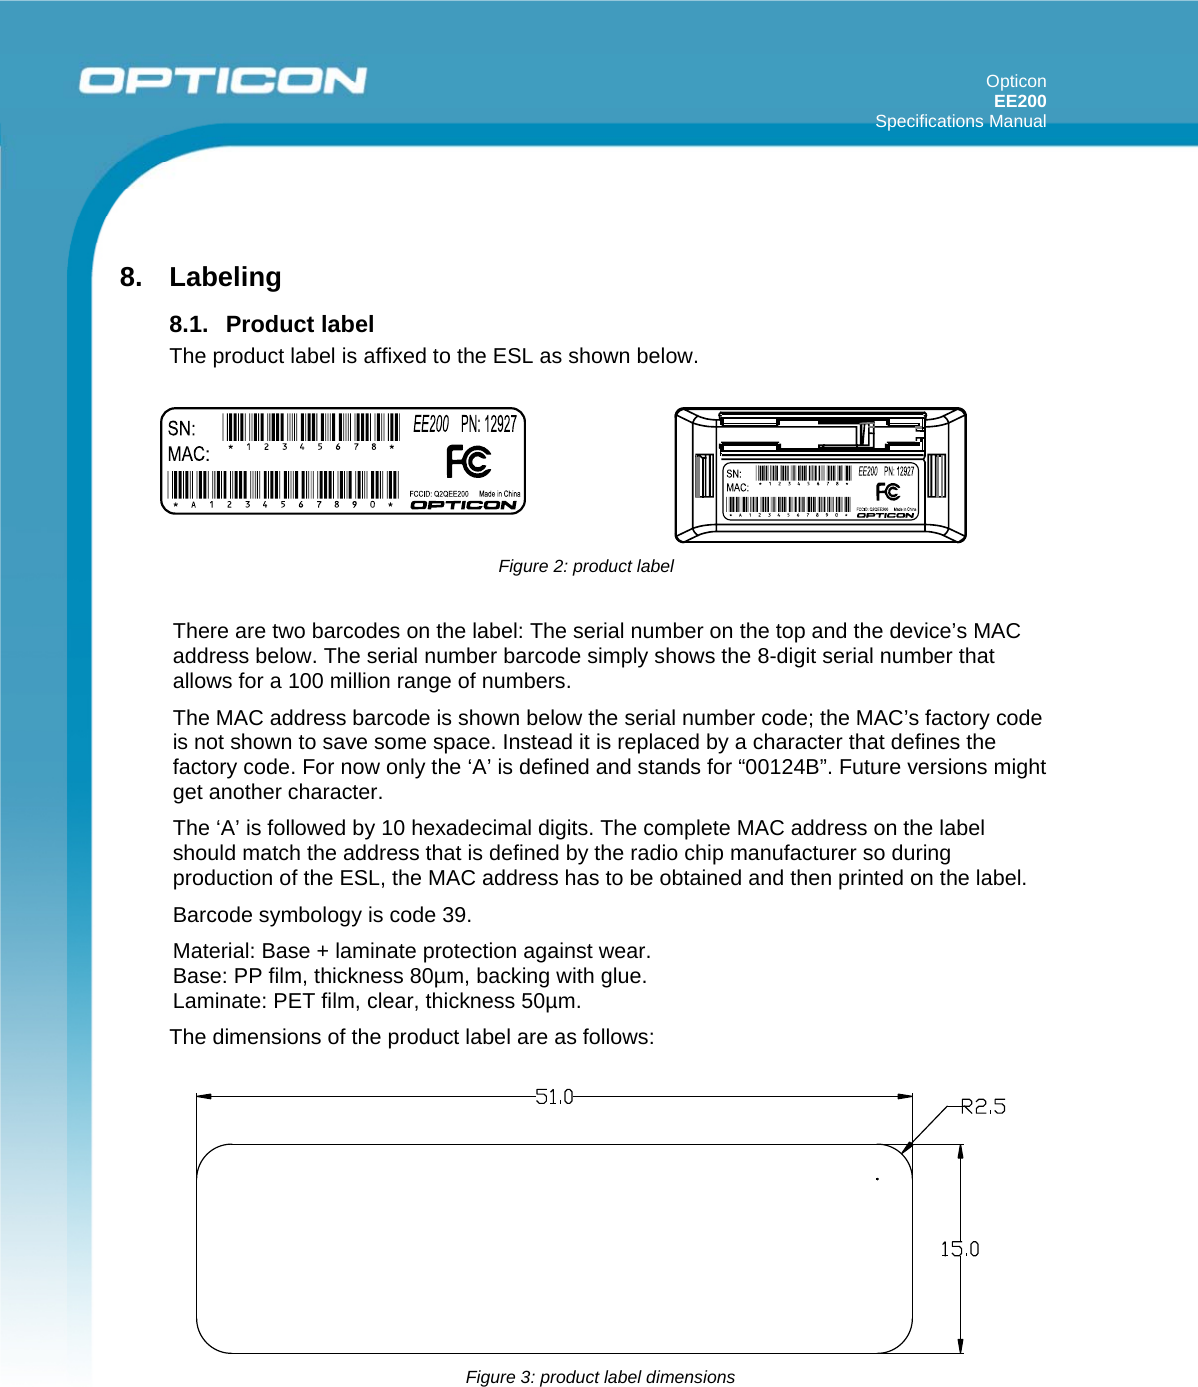 Opticon EE200  Specifications Manual       8. Labeling  8.1. Product label The product label is affixed to the ESL as shown below.  There are two barcodes on the label: The serial number on the top and the device’s MAC address below. The serial number barcode simply shows the 8-digit serial number that allows for a 100 million range of numbers.  The MAC address barcode is shown below the serial number code; the MAC’s factory code is not shown to save some space. Instead it is replaced by a character that defines the factory code. For now only the ‘A’ is defined and stands for “00124B”. Future versions might get another character. The ‘A’ is followed by 10 hexadecimal digits. The complete MAC address on the label should match the address that is defined by the radio chip manufacturer so during production of the ESL, the MAC address has to be obtained and then printed on the label. Barcode symbology is code 39.  Material: Base + laminate protection against wear. Base: PP film, thickness 80µm, backing with glue. Laminate: PET film, clear, thickness 50µm. The dimensions of the product label are as follows:     Figure 2: product label  Figure 3: product label dimensions 